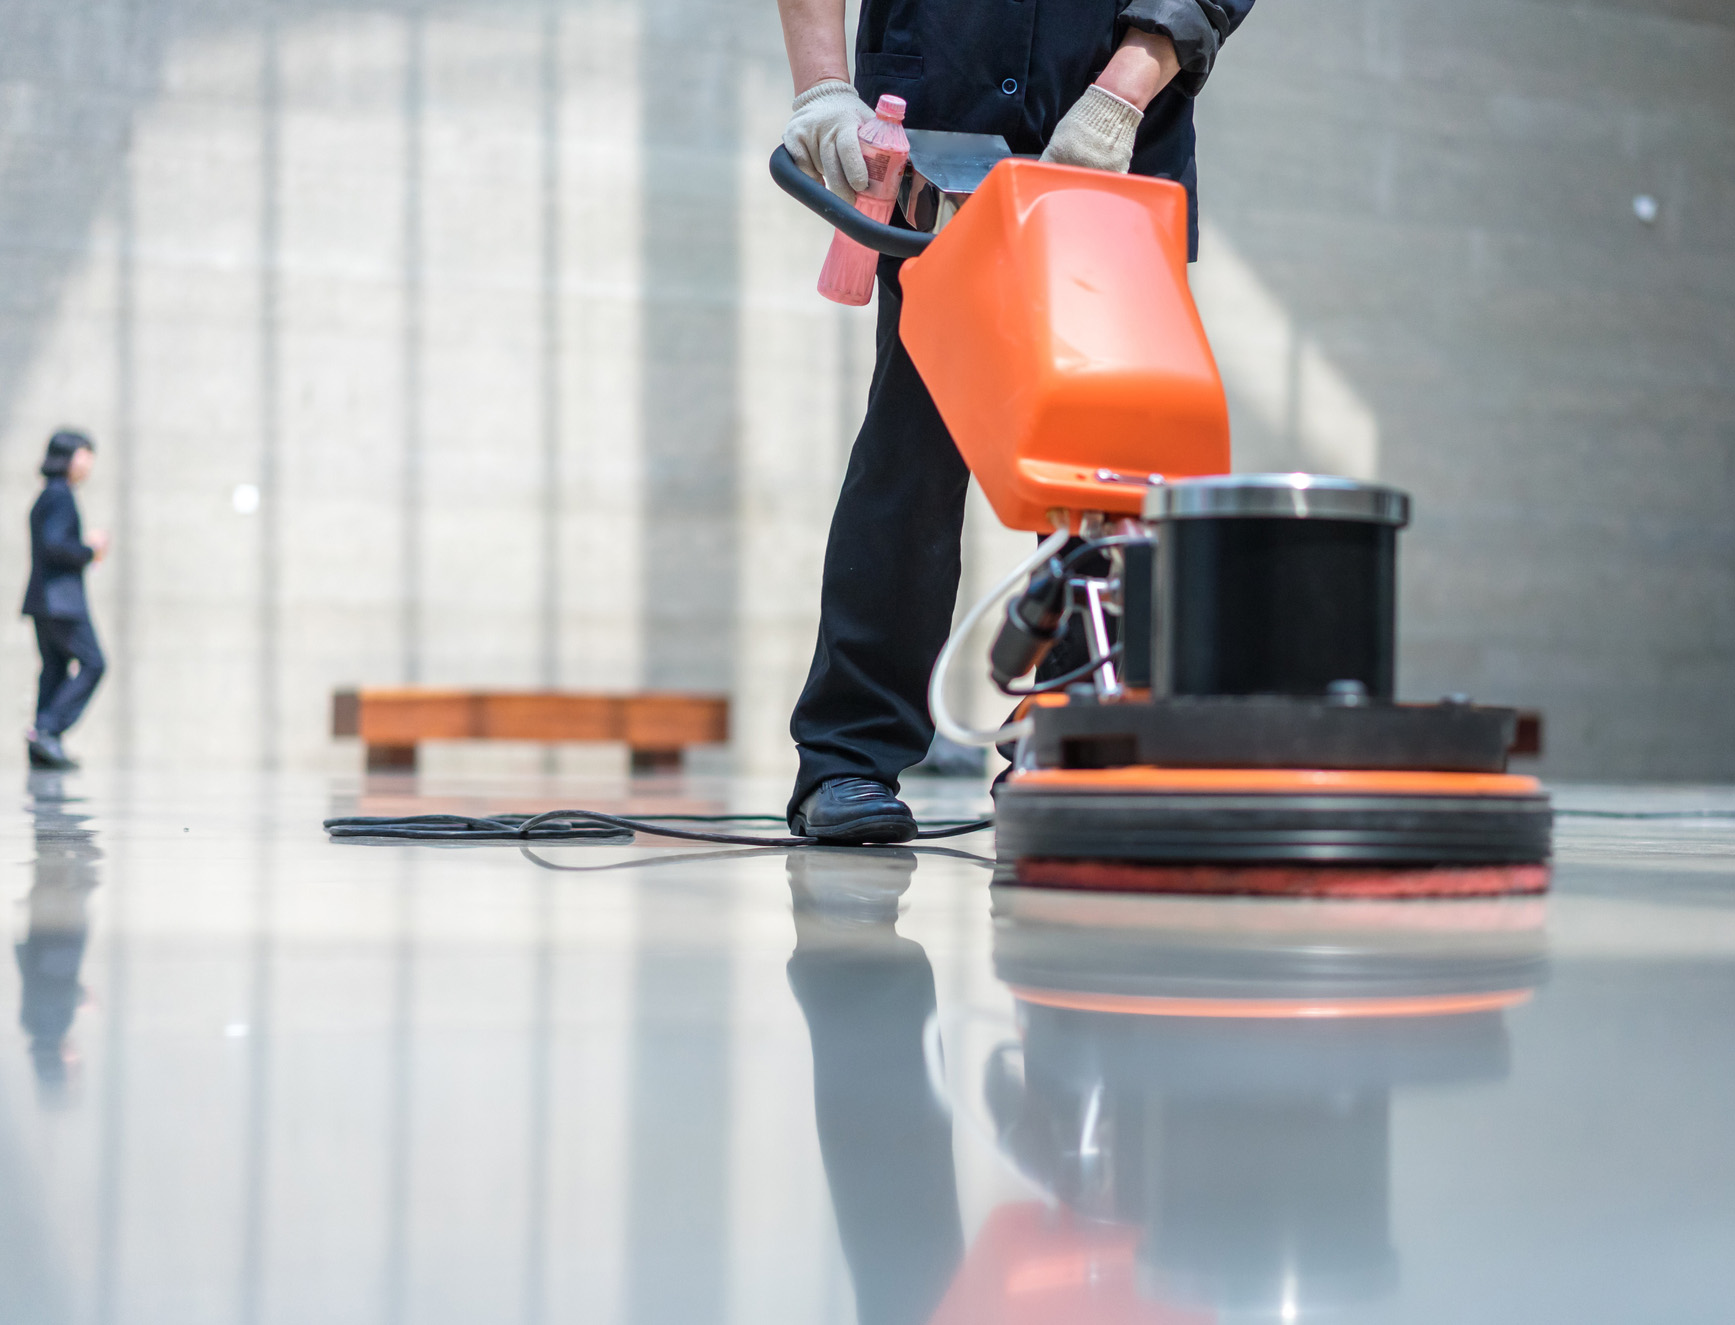 shoup's cleaning can help you put your best business foot forward